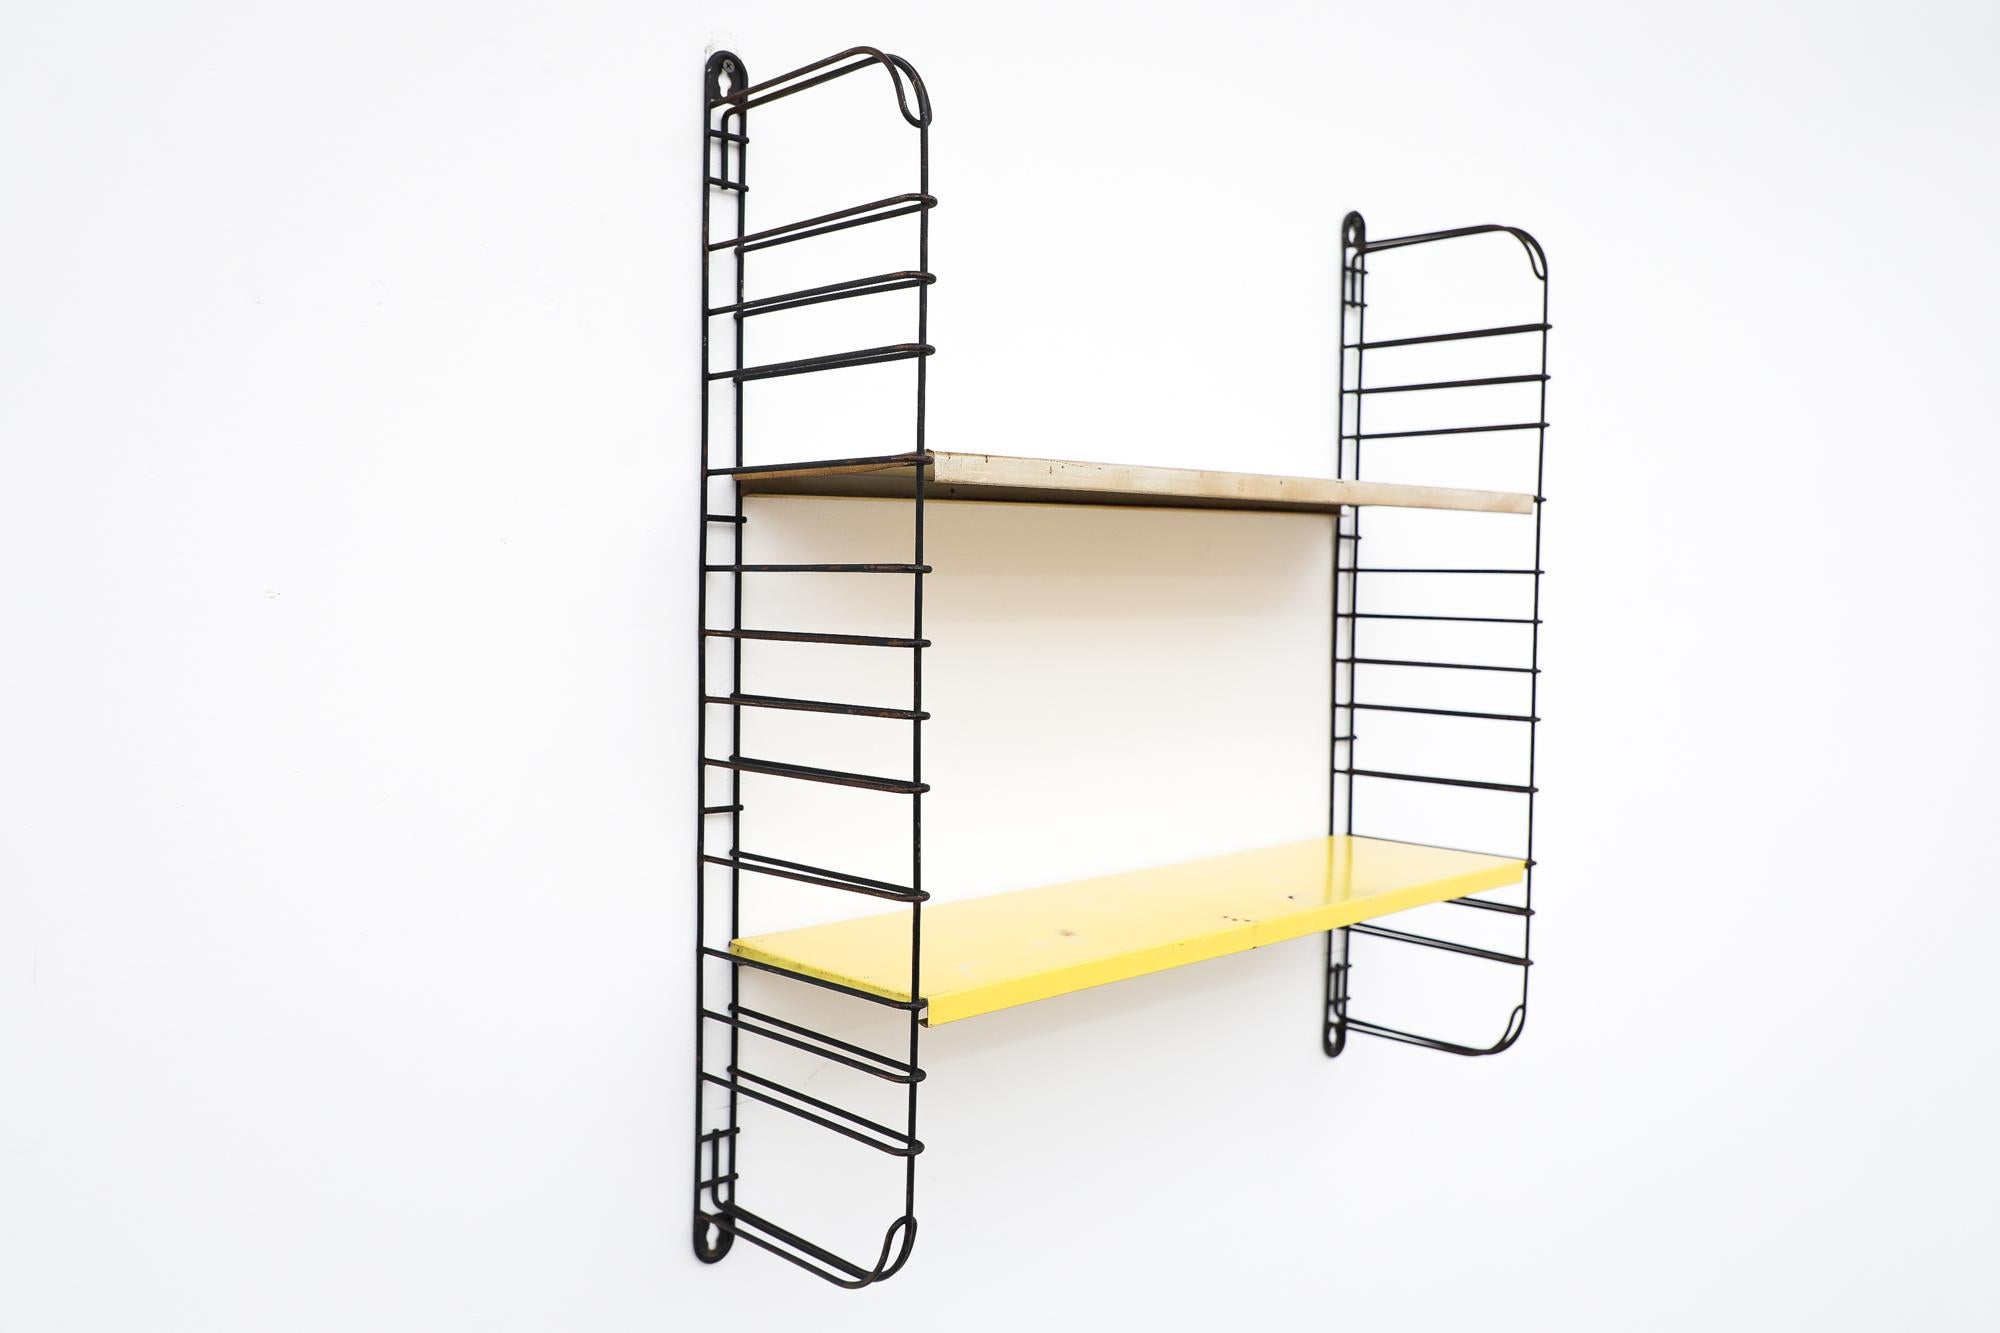 Midcentury Tomado White and Yellow Industrial Shelving Unit 9